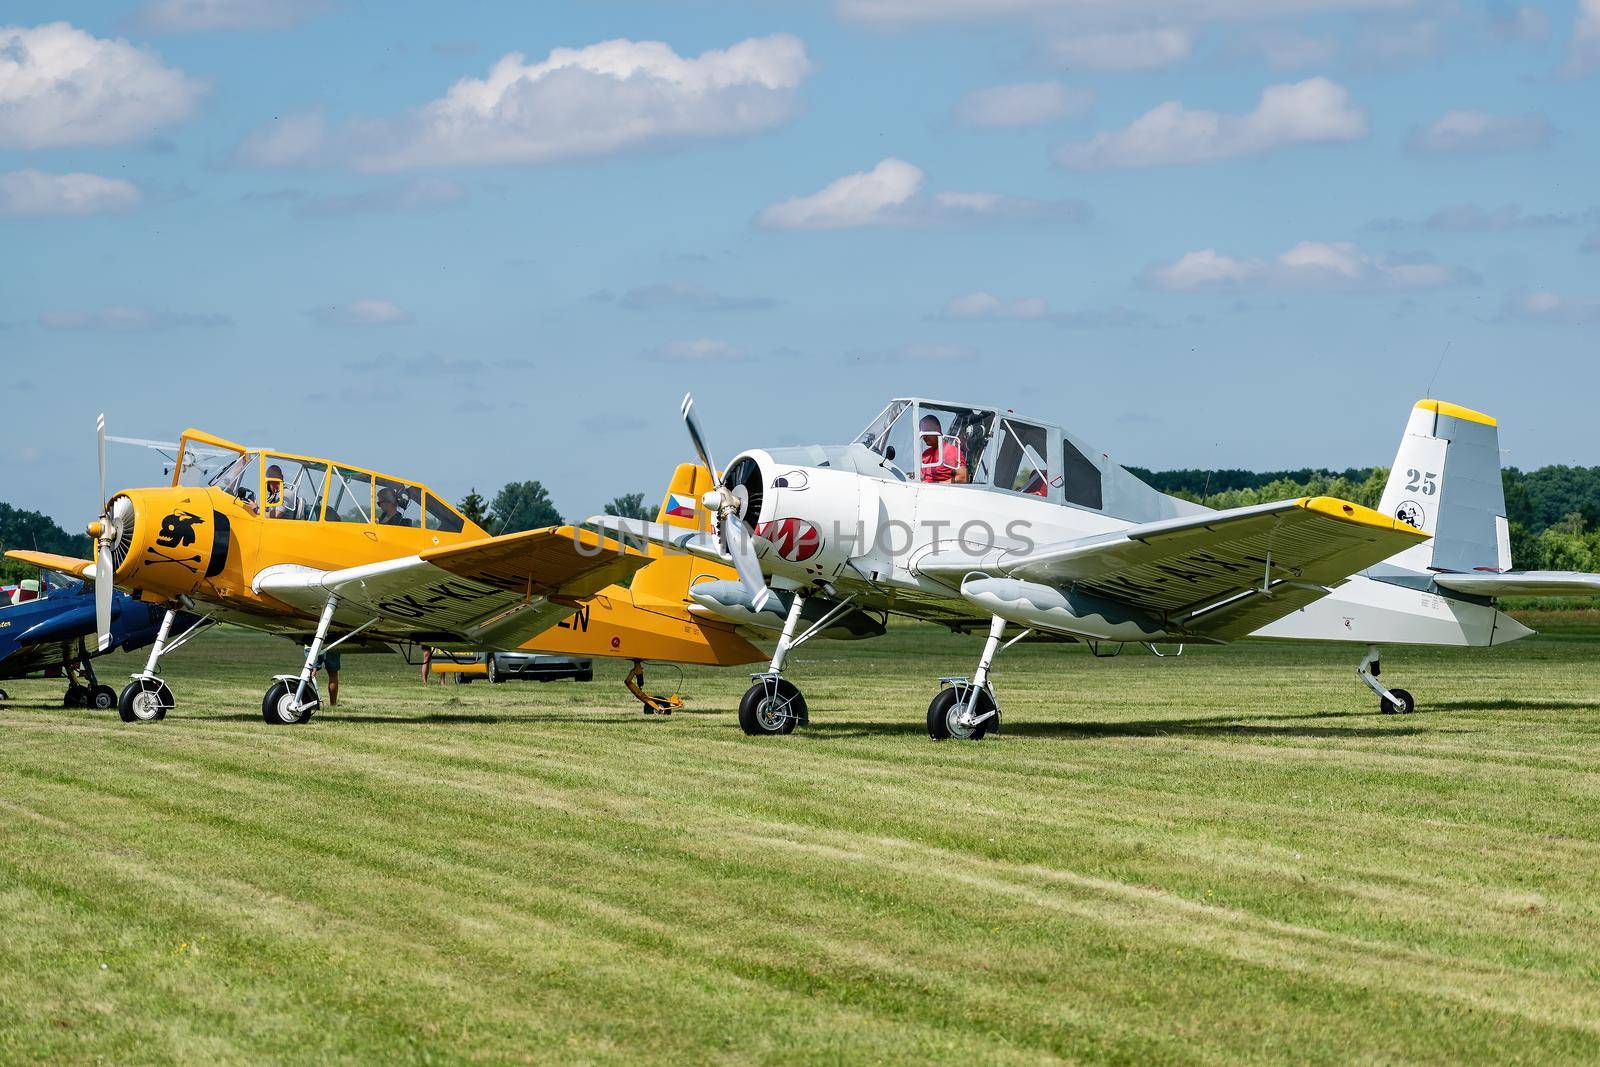 Breclav, Czech Republic - July 02, 2022 Aviation Day. Two Zlin Z-37A-2 Bumblebee aircraft used in agriculture